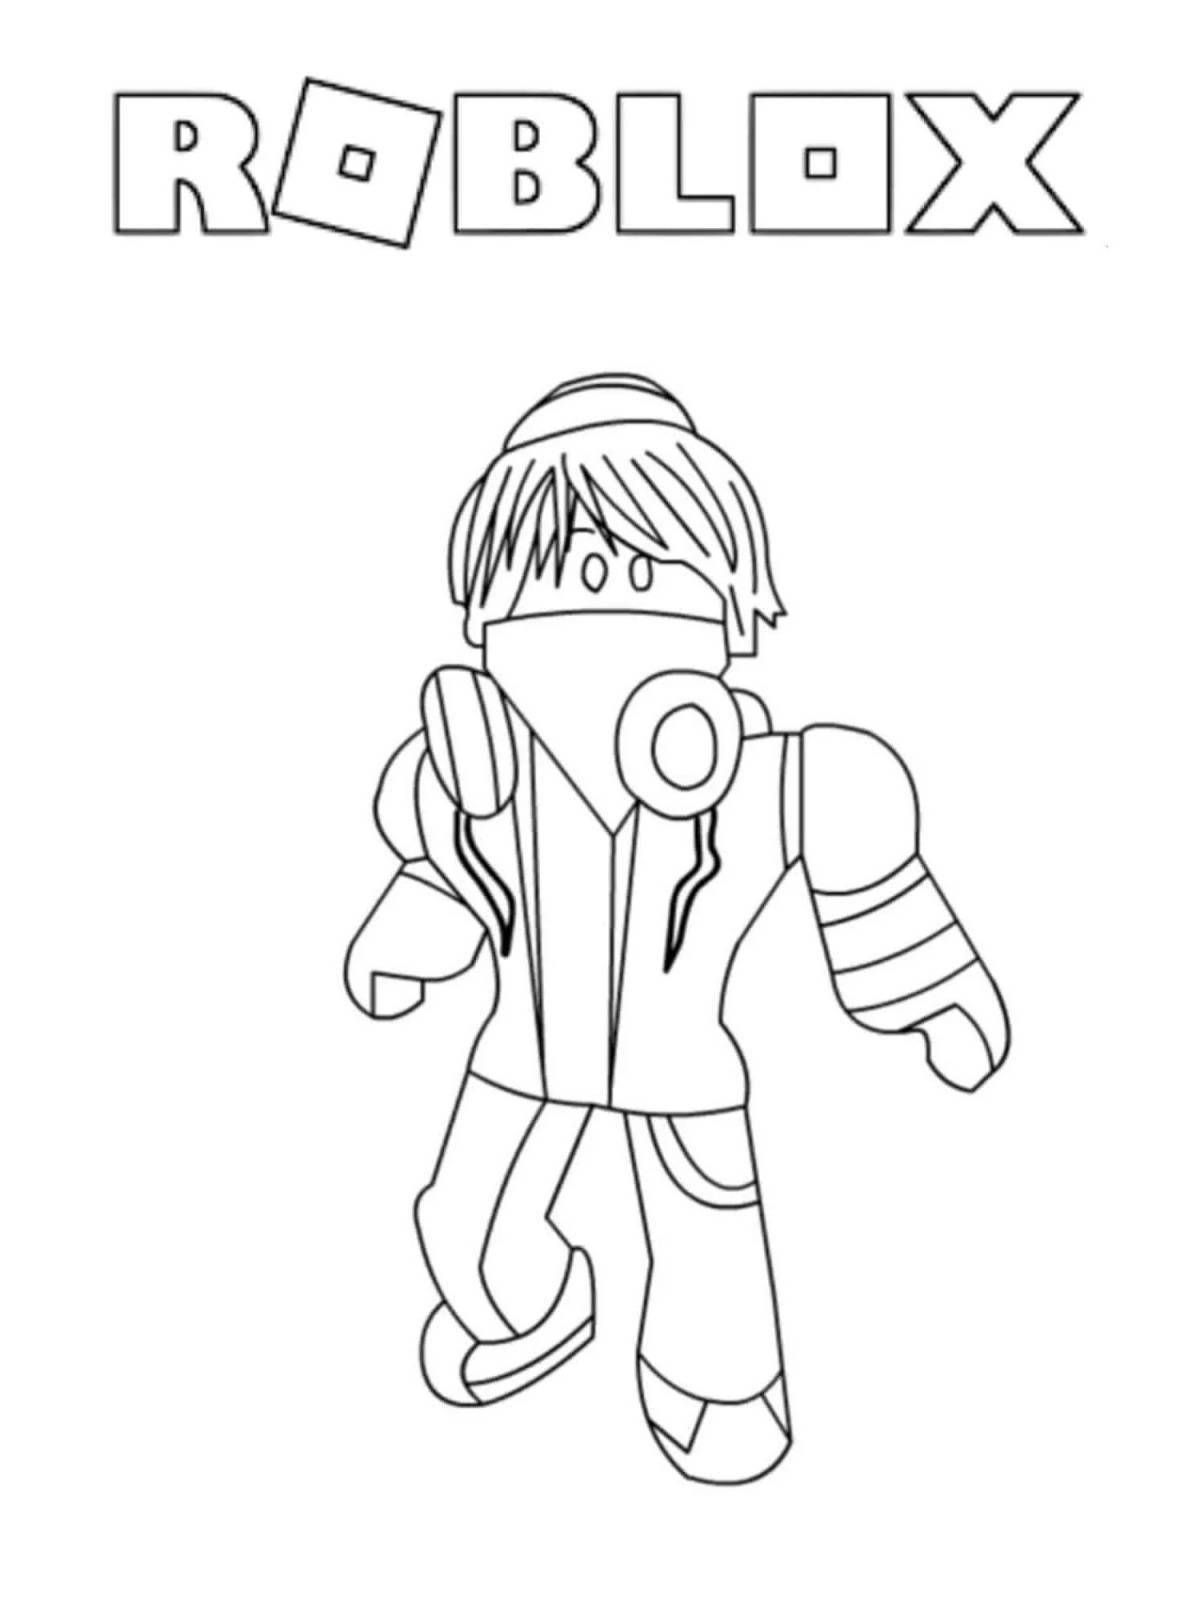 Sweet roblox coloring book for girls